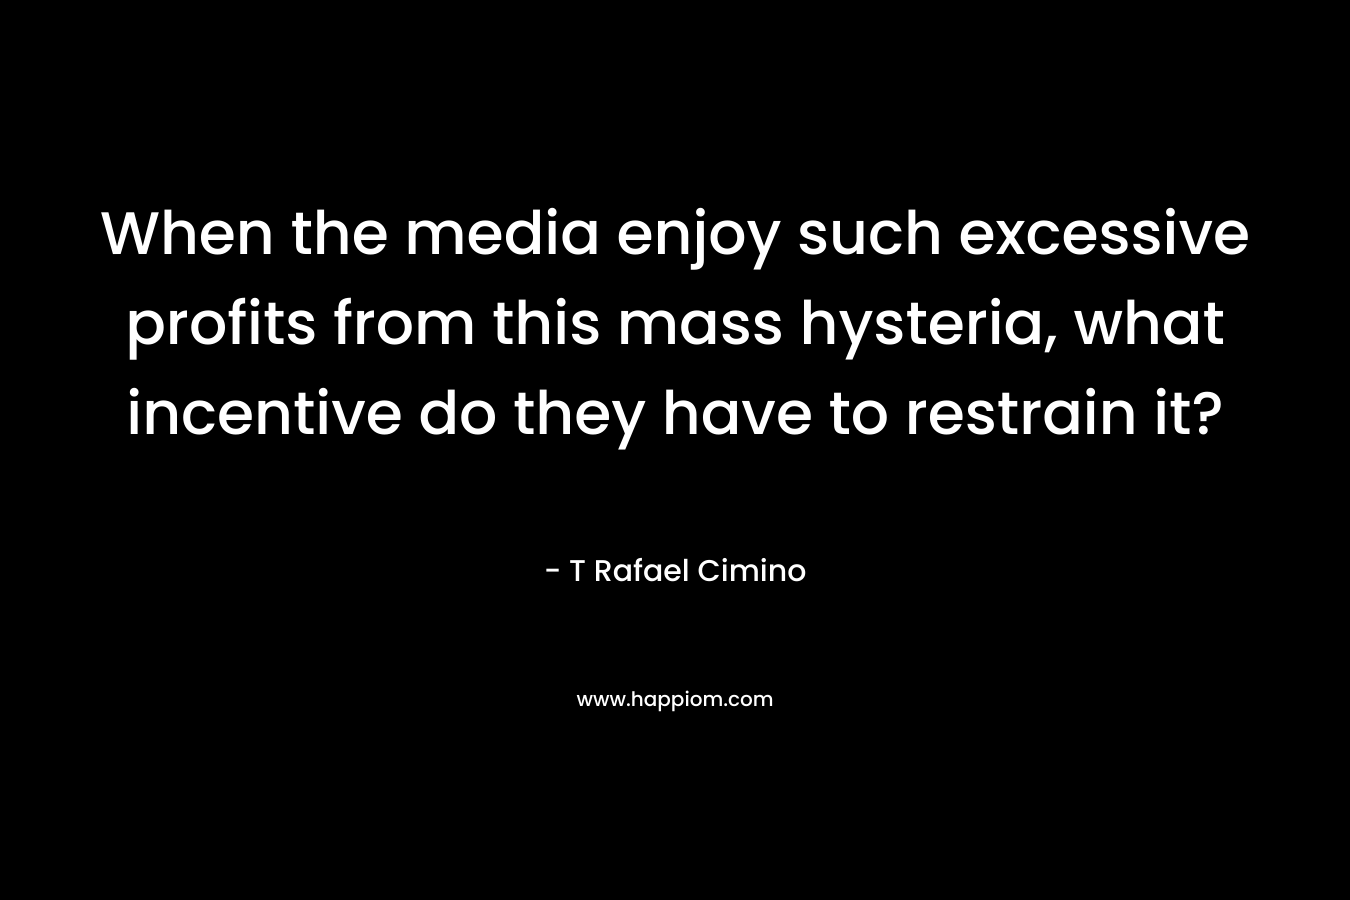 When the media enjoy such excessive profits from this mass hysteria, what incentive do they have to restrain it? – T Rafael Cimino